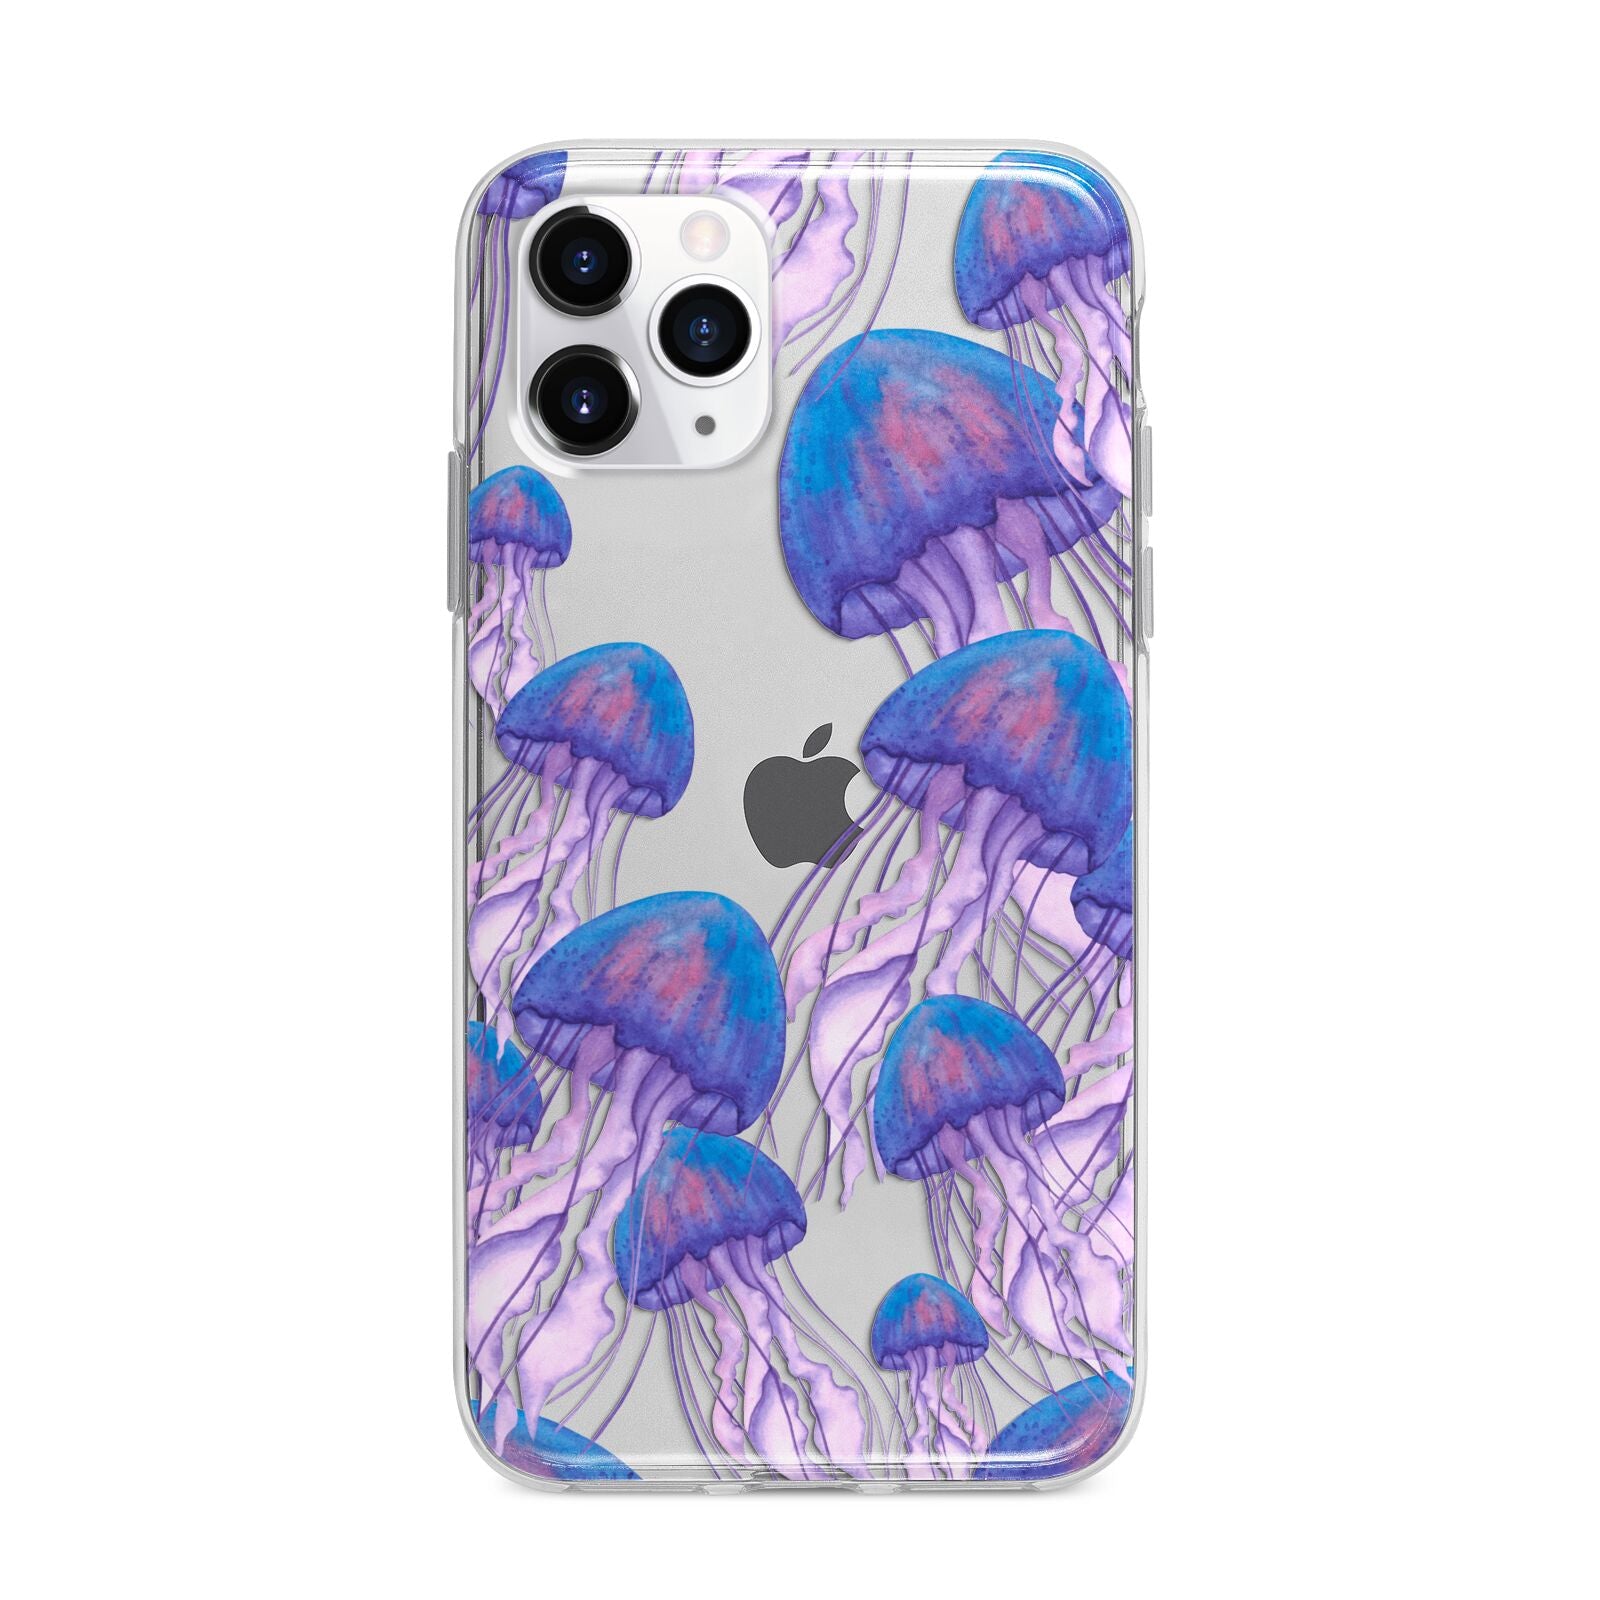 Jellyfish Apple iPhone 11 Pro Max in Silver with Bumper Case